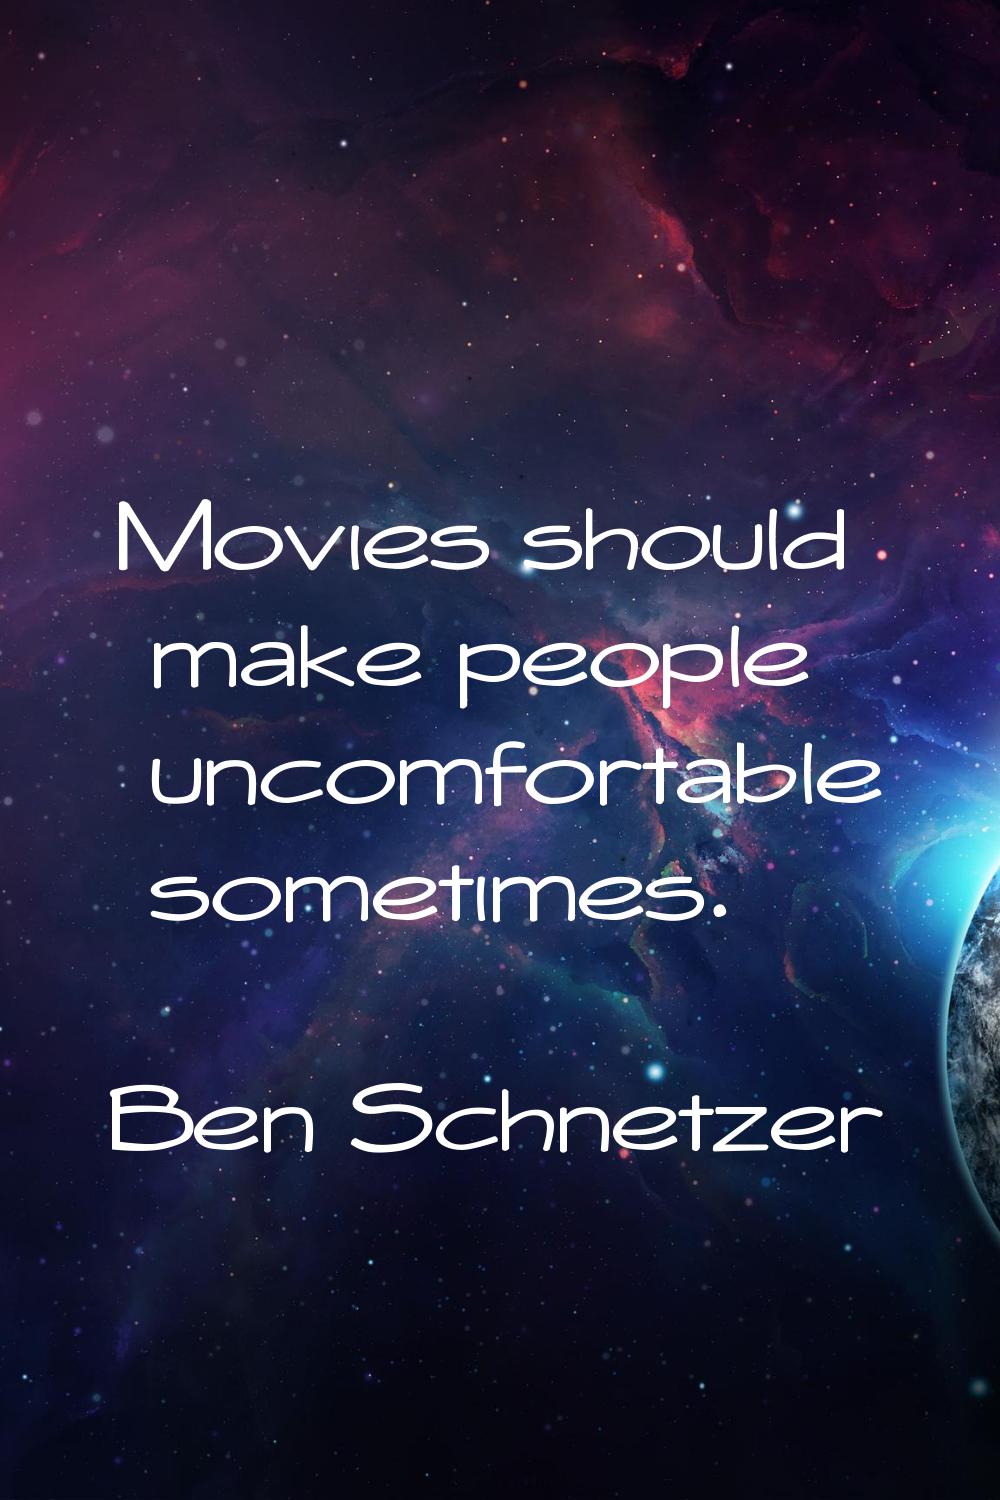 Movies should make people uncomfortable sometimes.